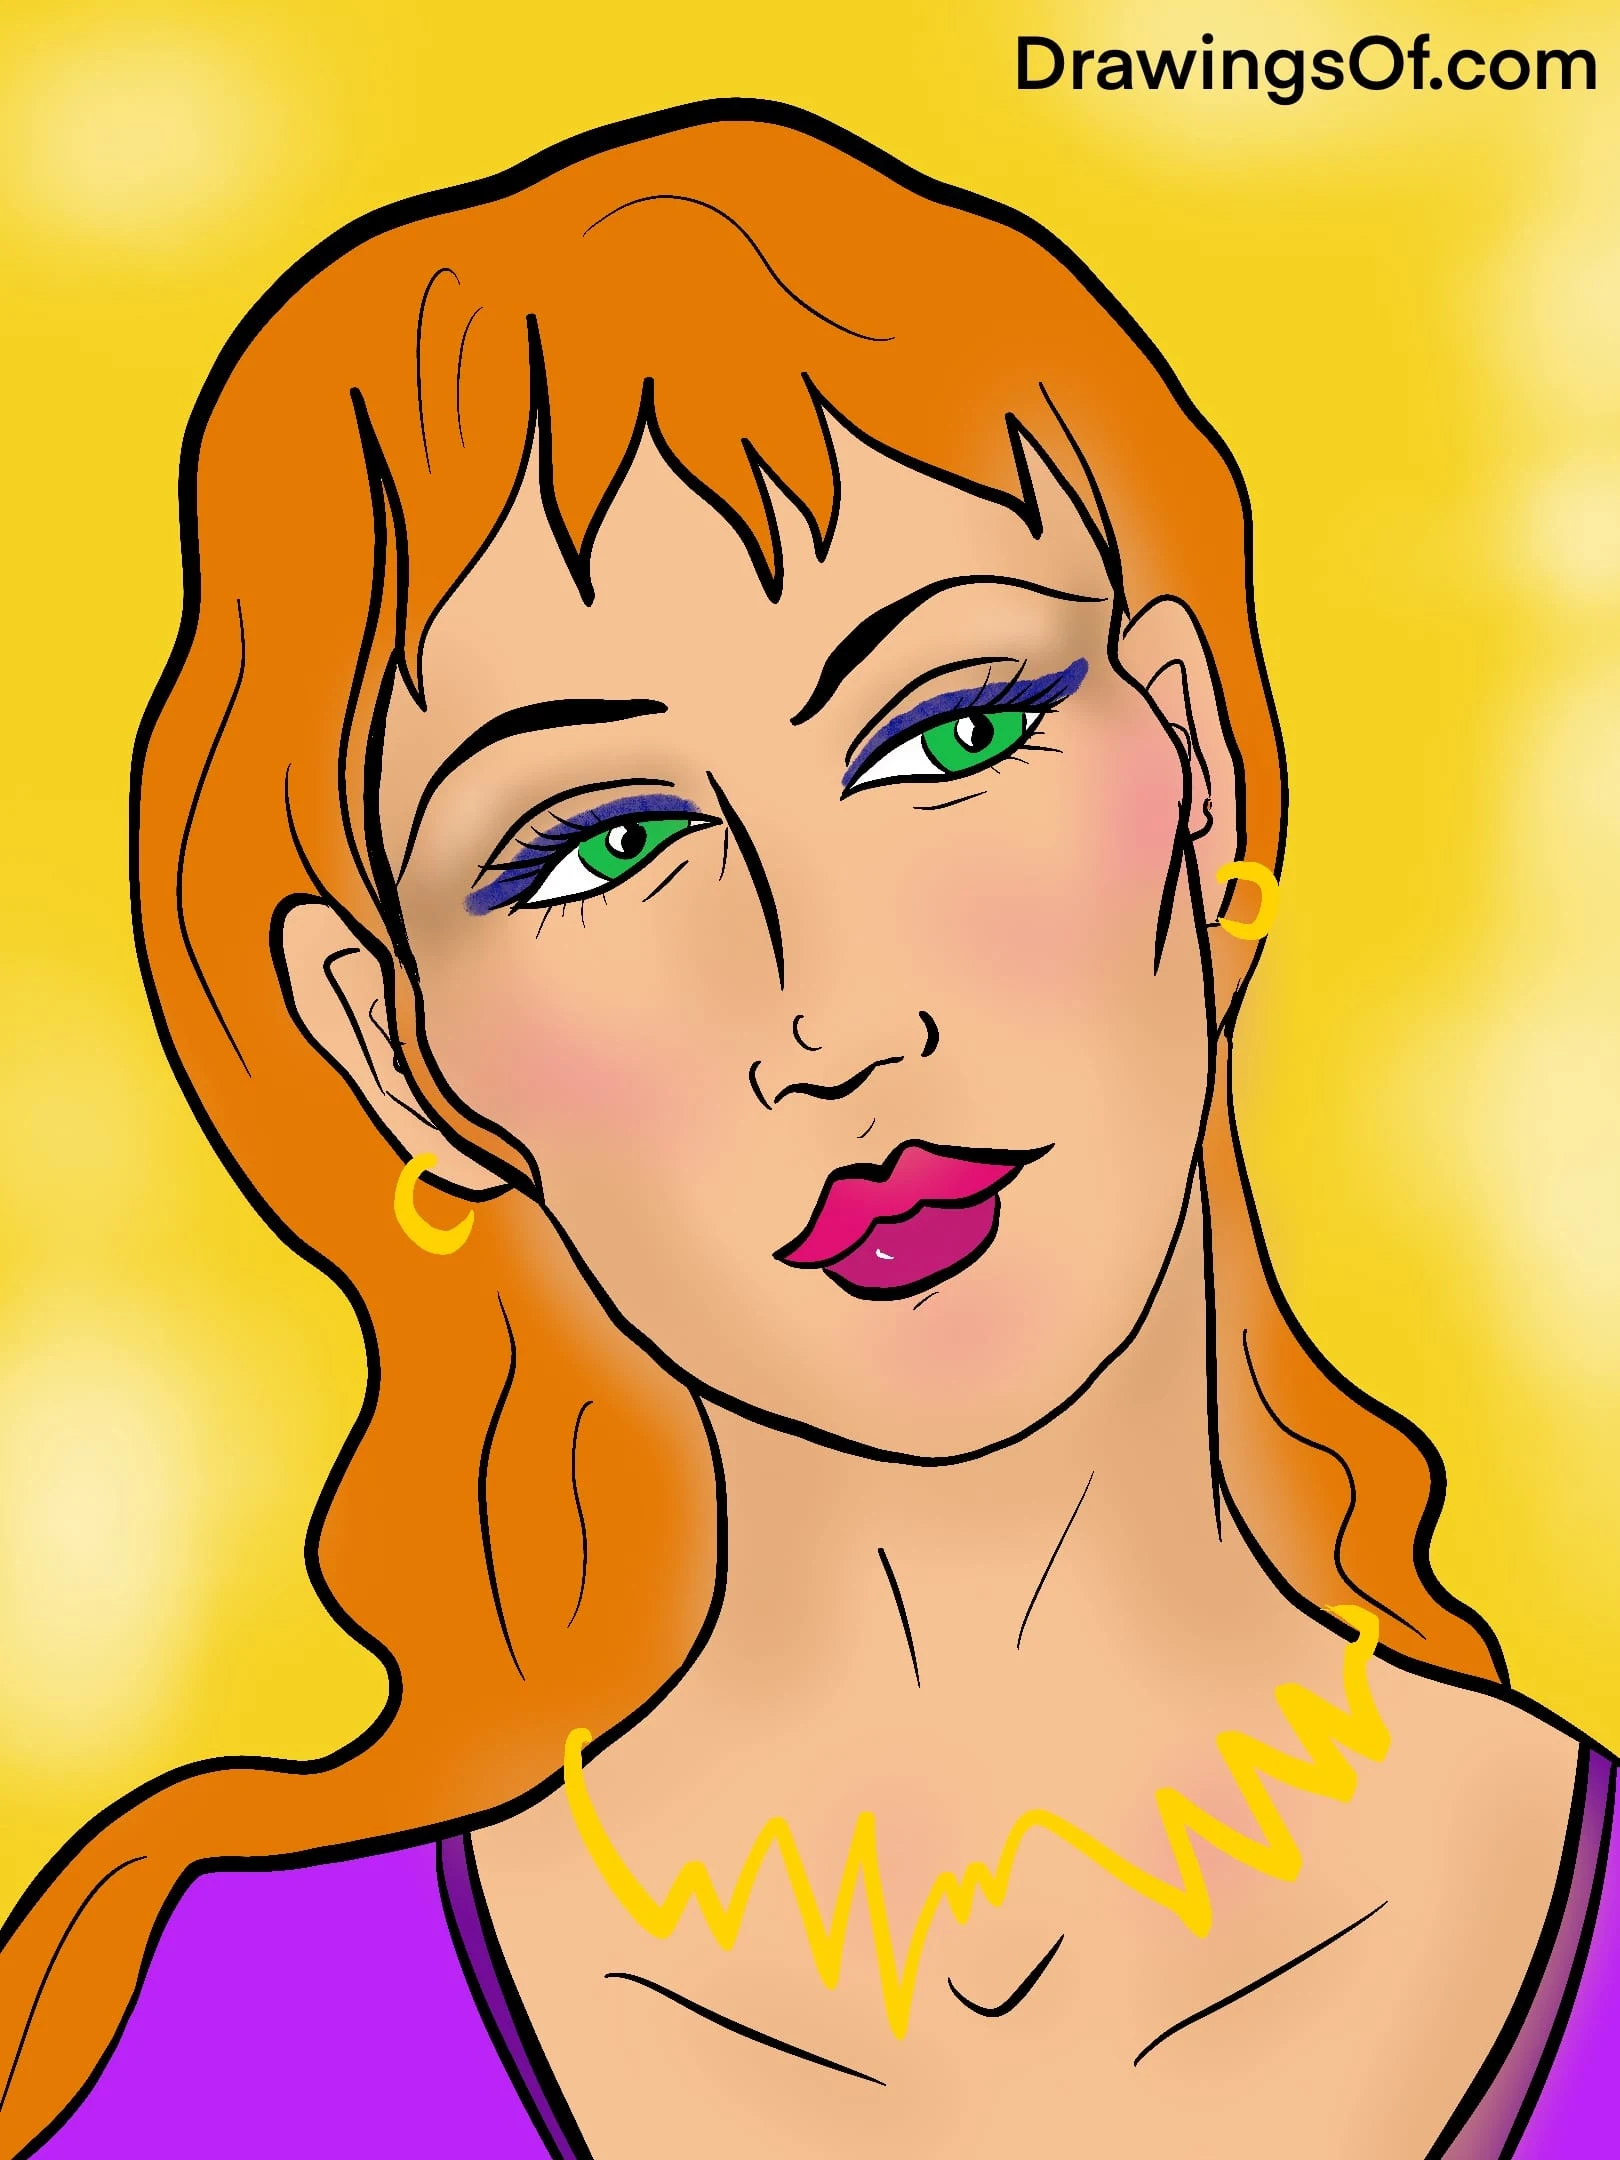 Line drawing of woman with orange hair and makeup